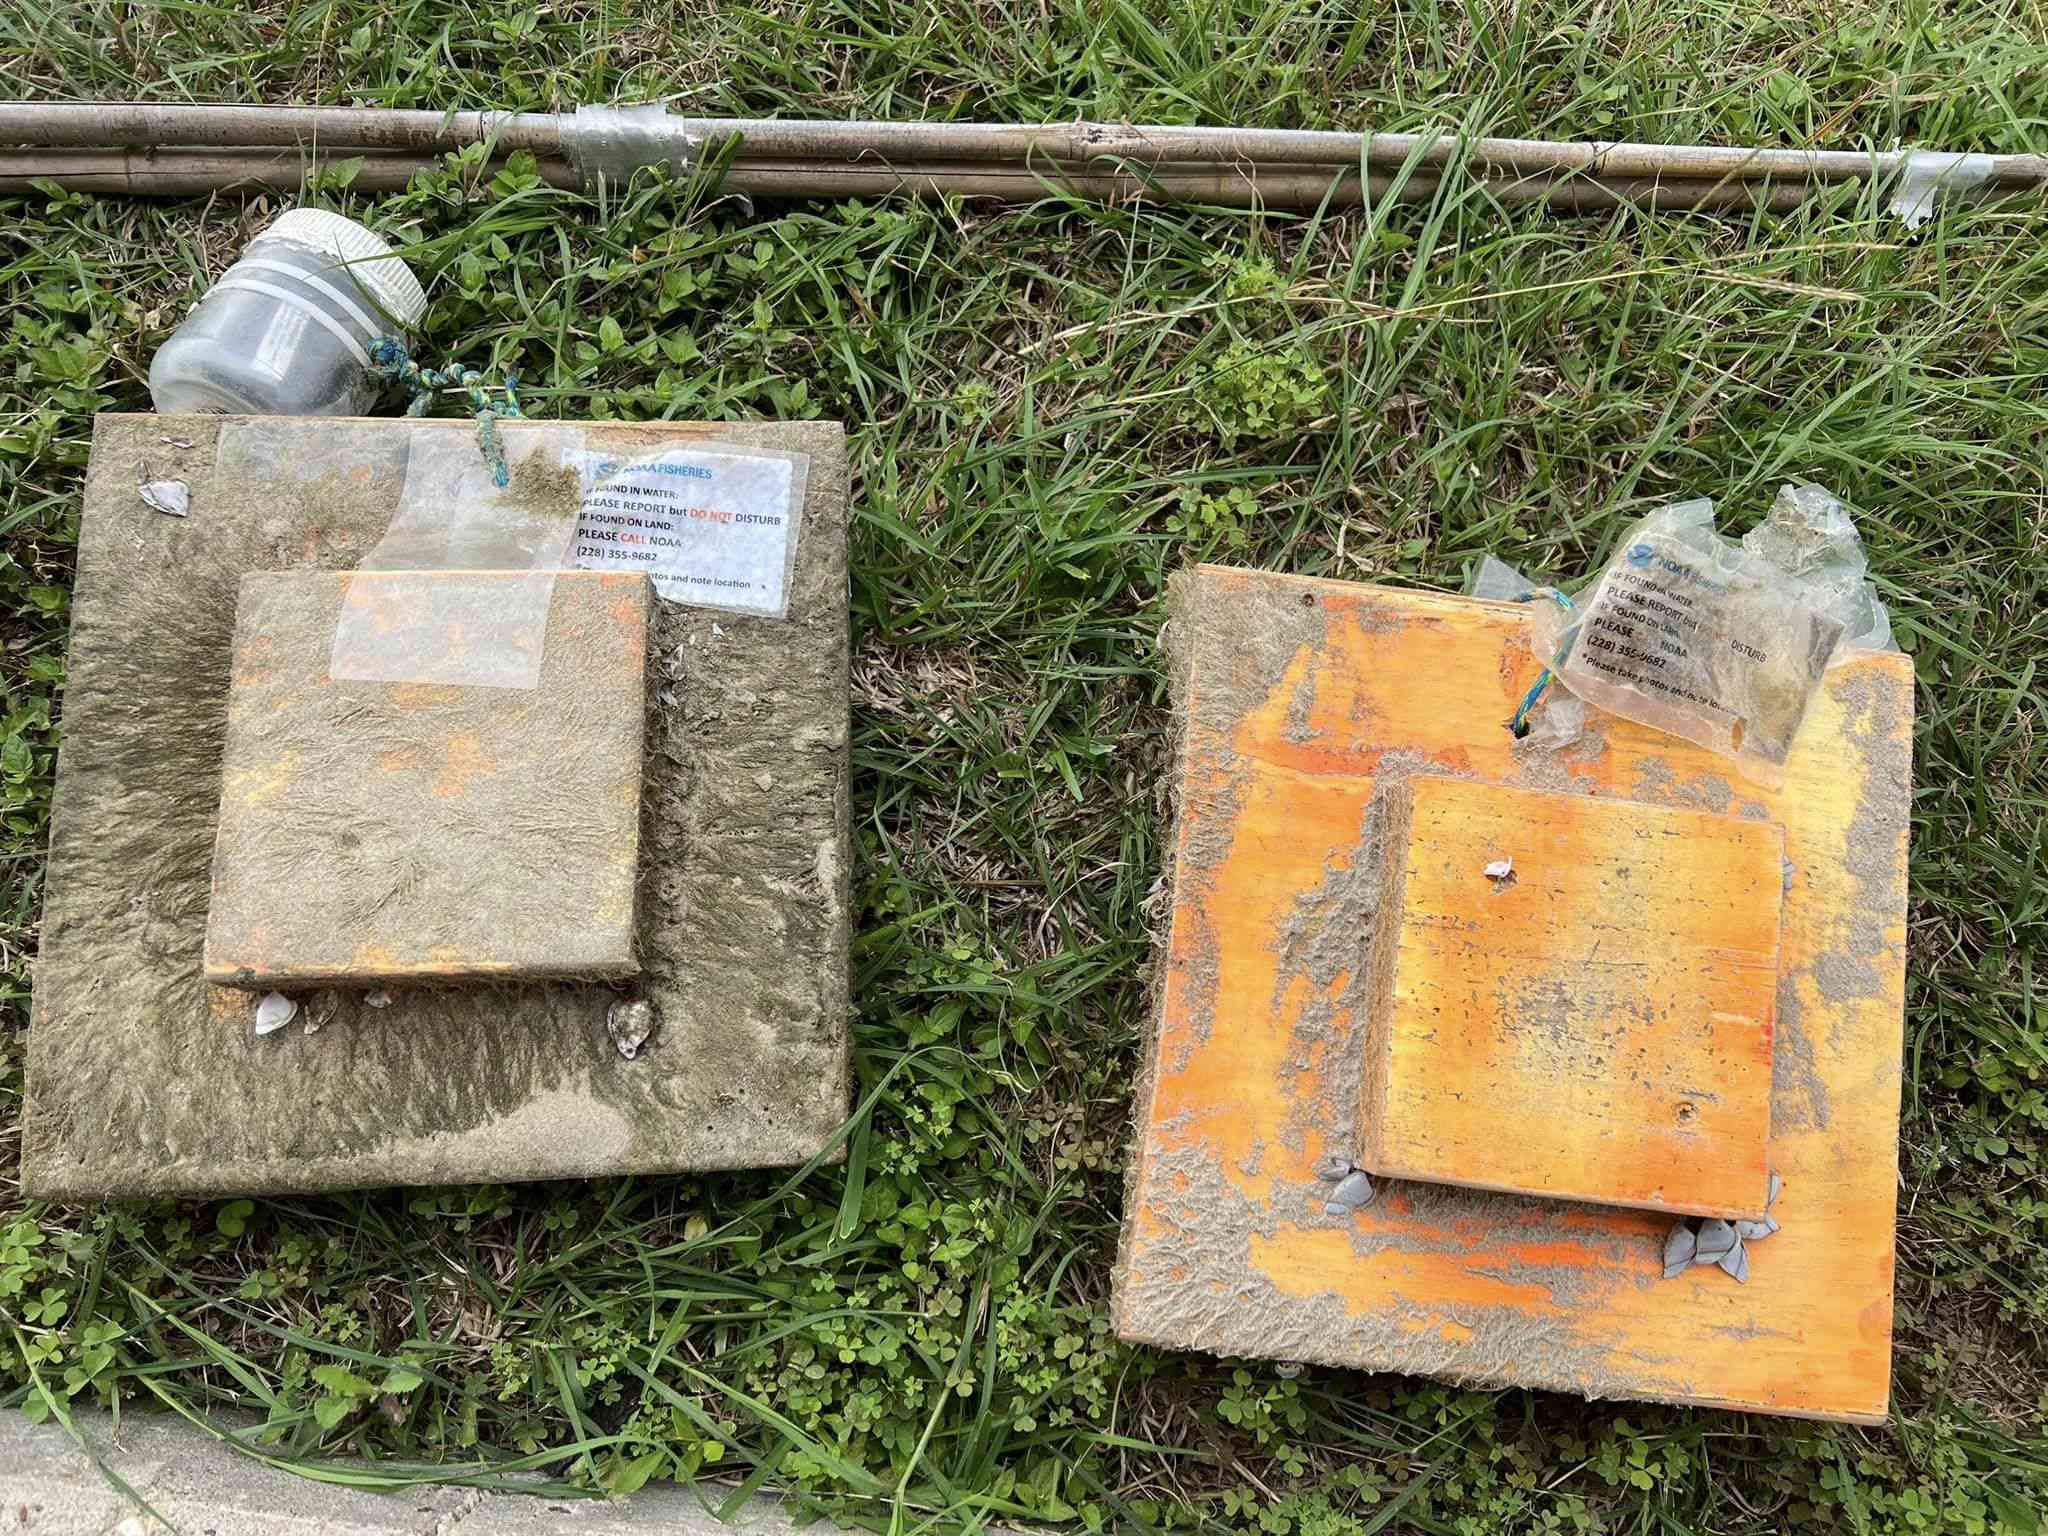 There’s A Good Reason For The Colorful Wooden Blocks Washing Up On Texas Beaches